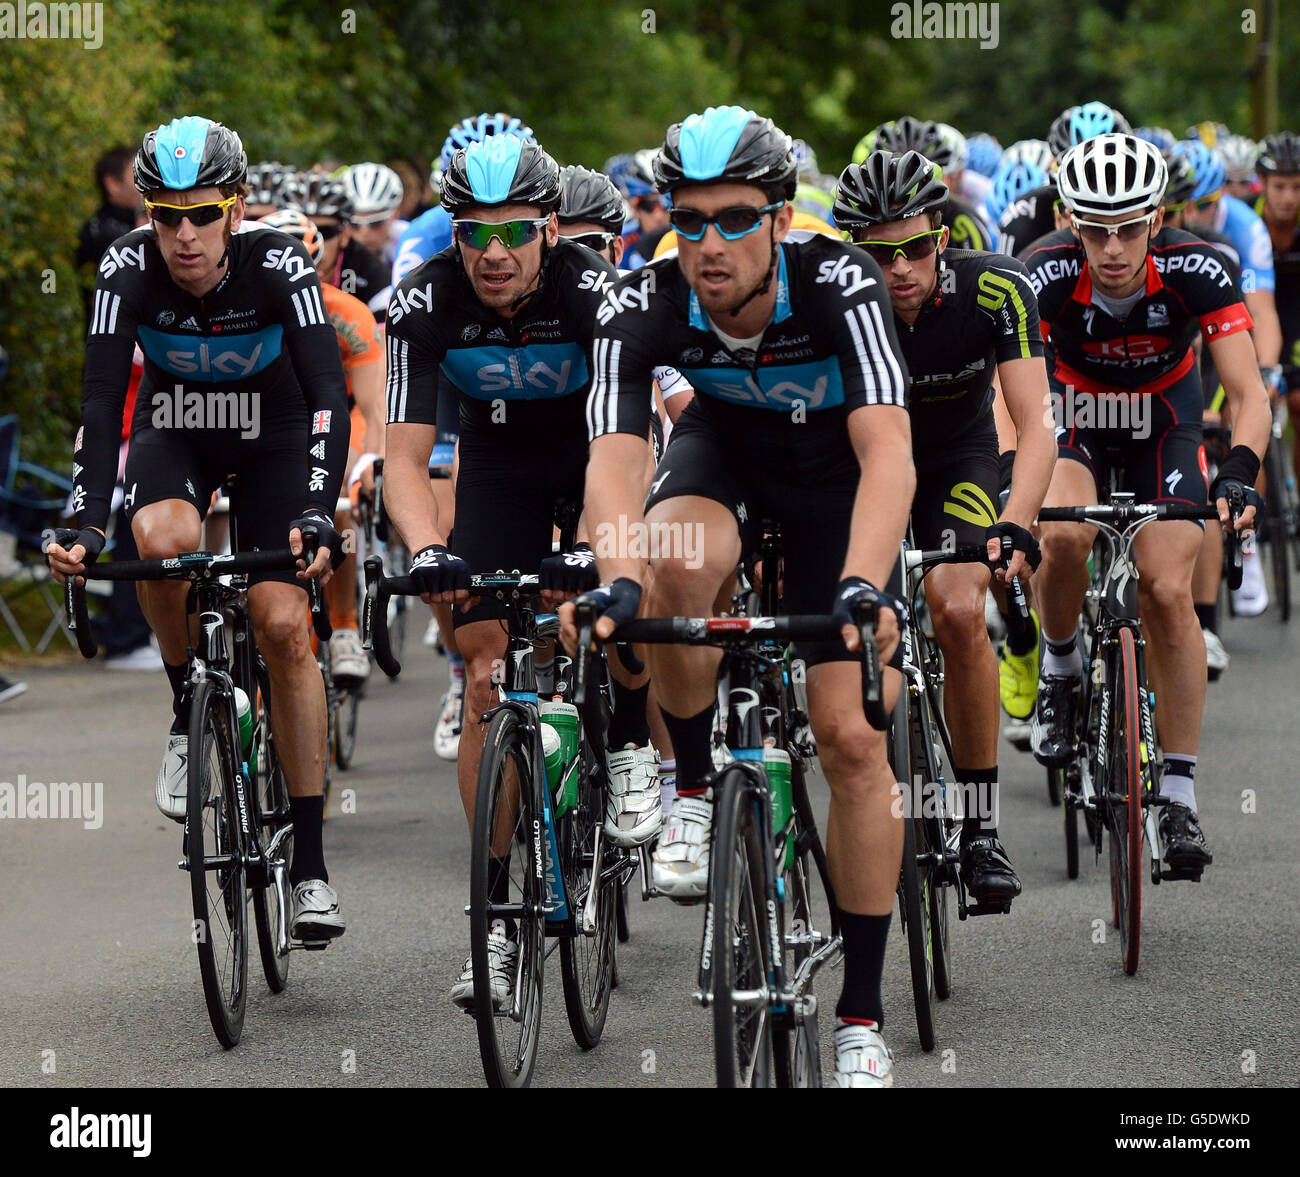 Bradley Wiggins (left) with the rest of the Sky Team as they chase a breakaway group on the climb of Alstonfield in the Peak District during stage two of the Tour of Britain, from Nottingham to Knowsley. Stock Photo